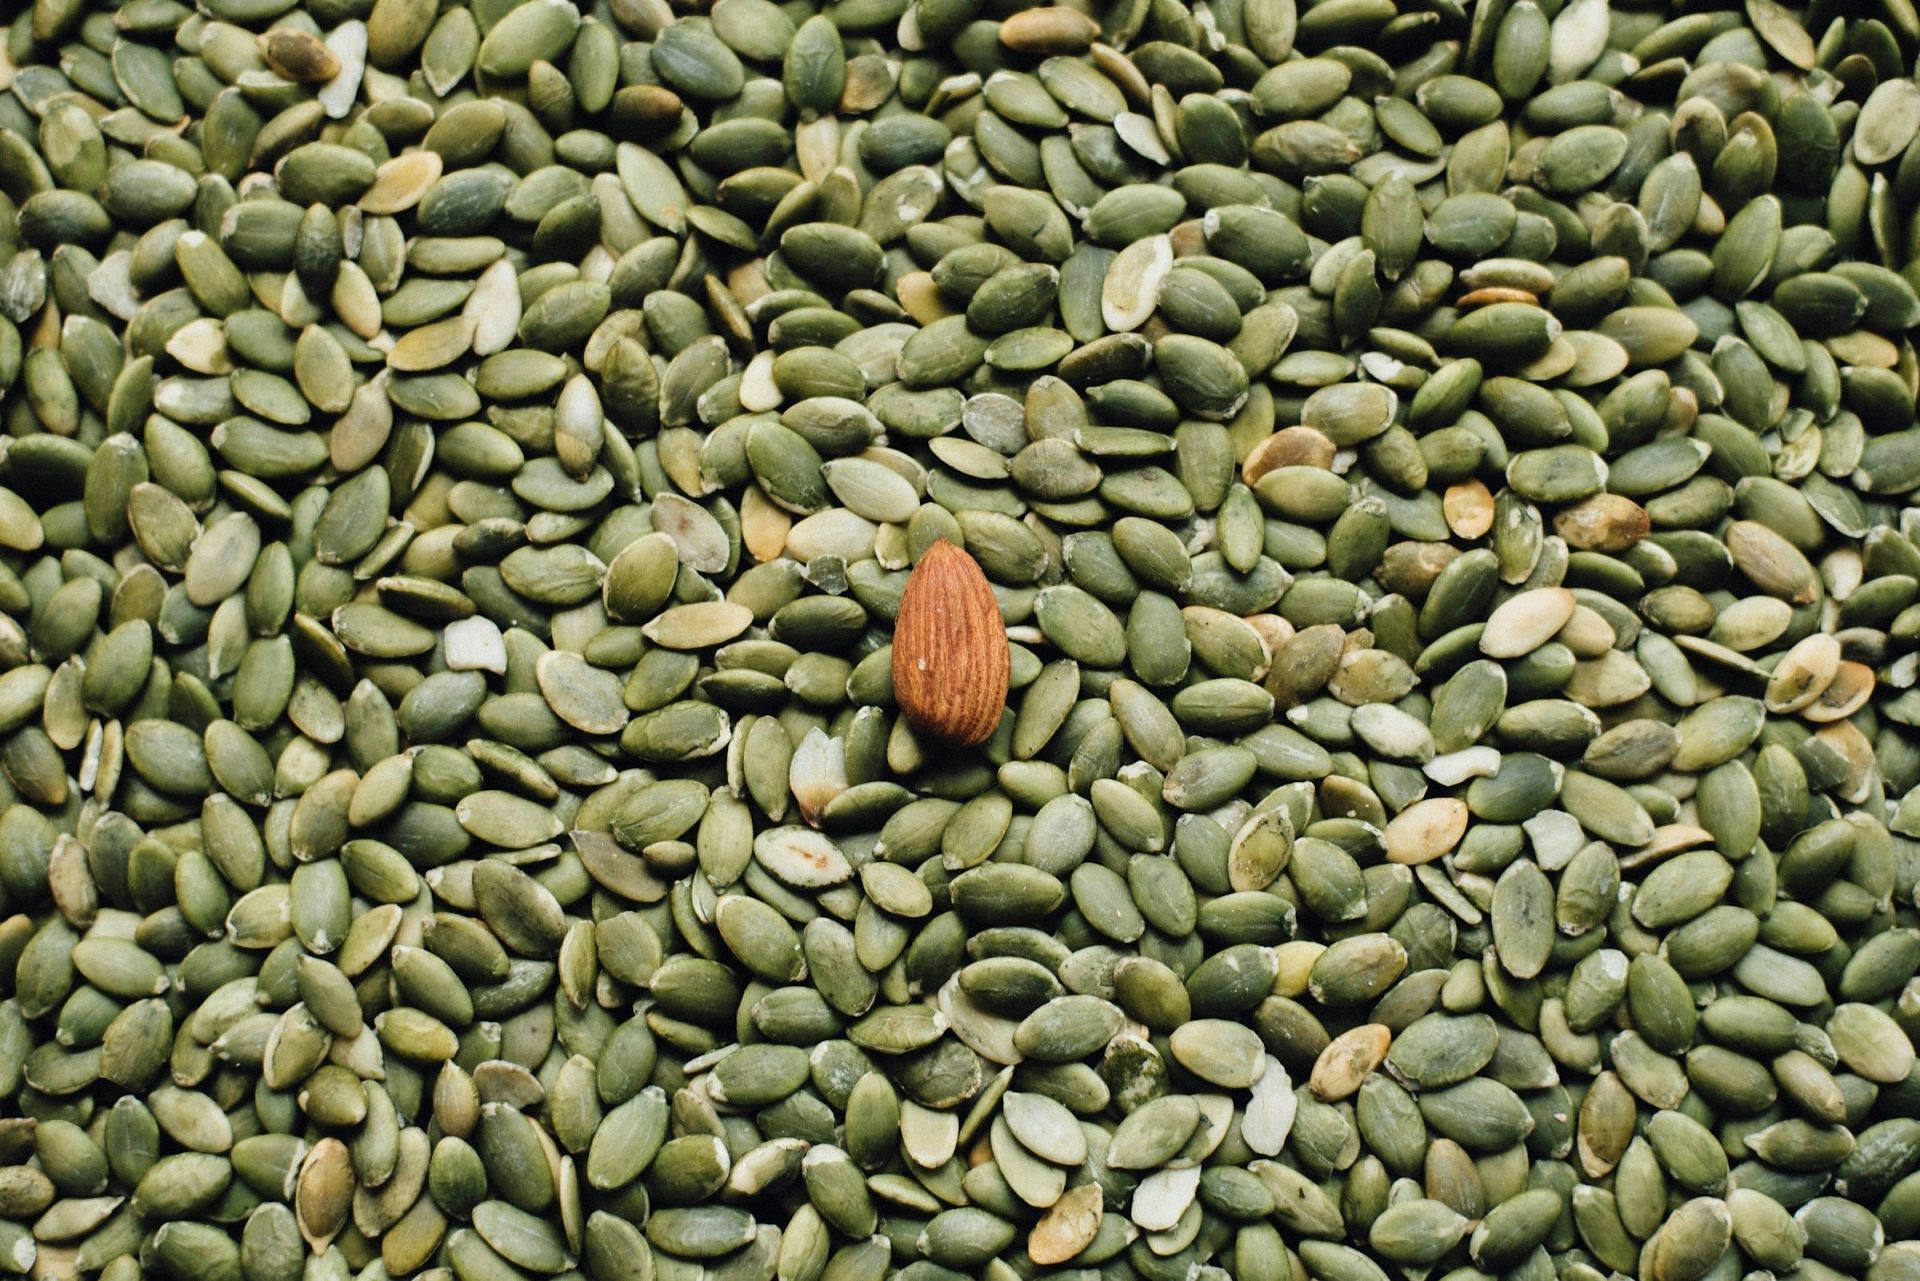 Seeds for Weight Loss (Image via Unsplash/Chuttersnap)